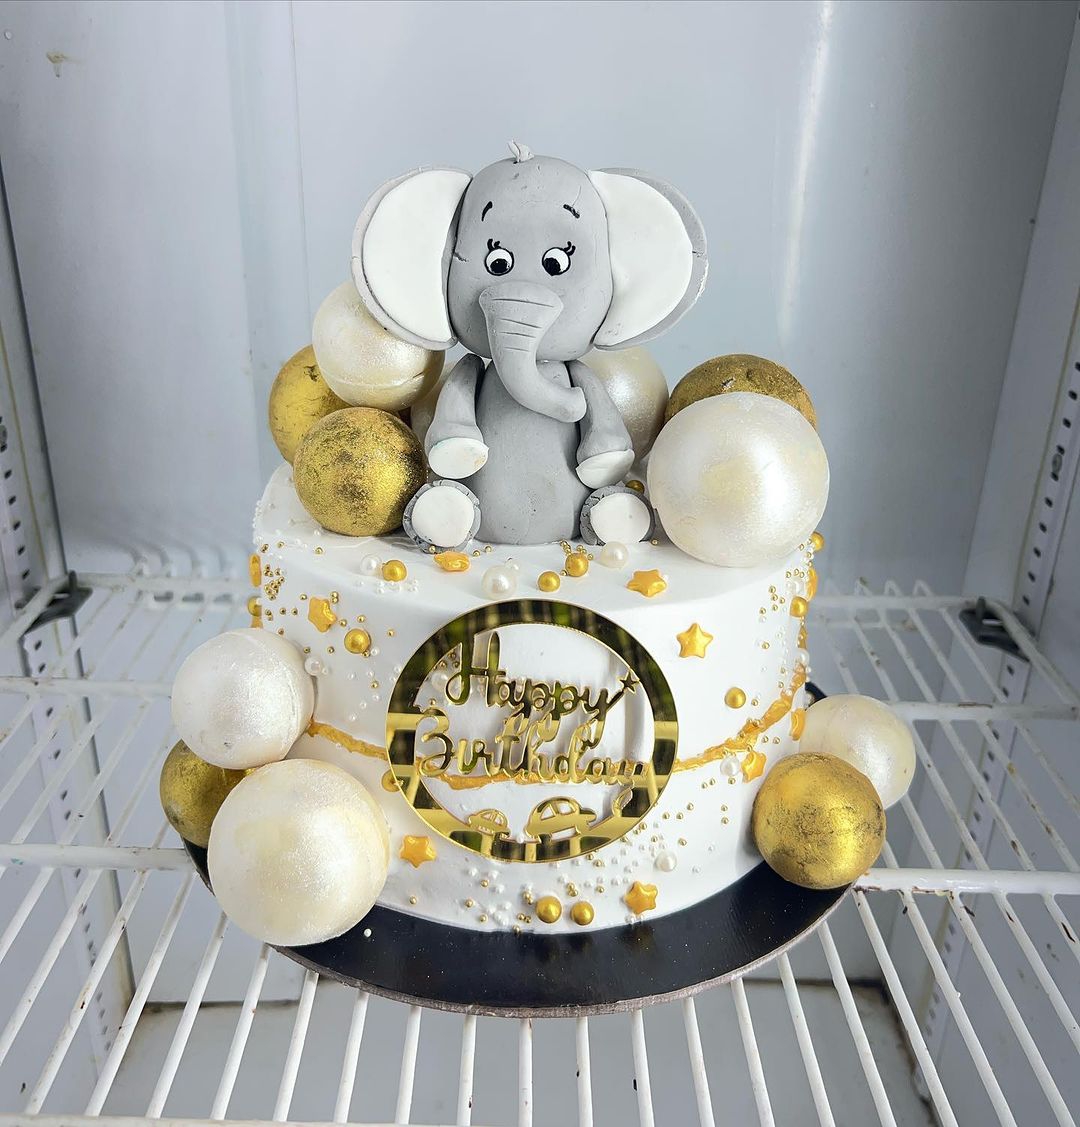 Buy Beautiful Special Cake for Ganesh Chaturthi | Delivery in Noida